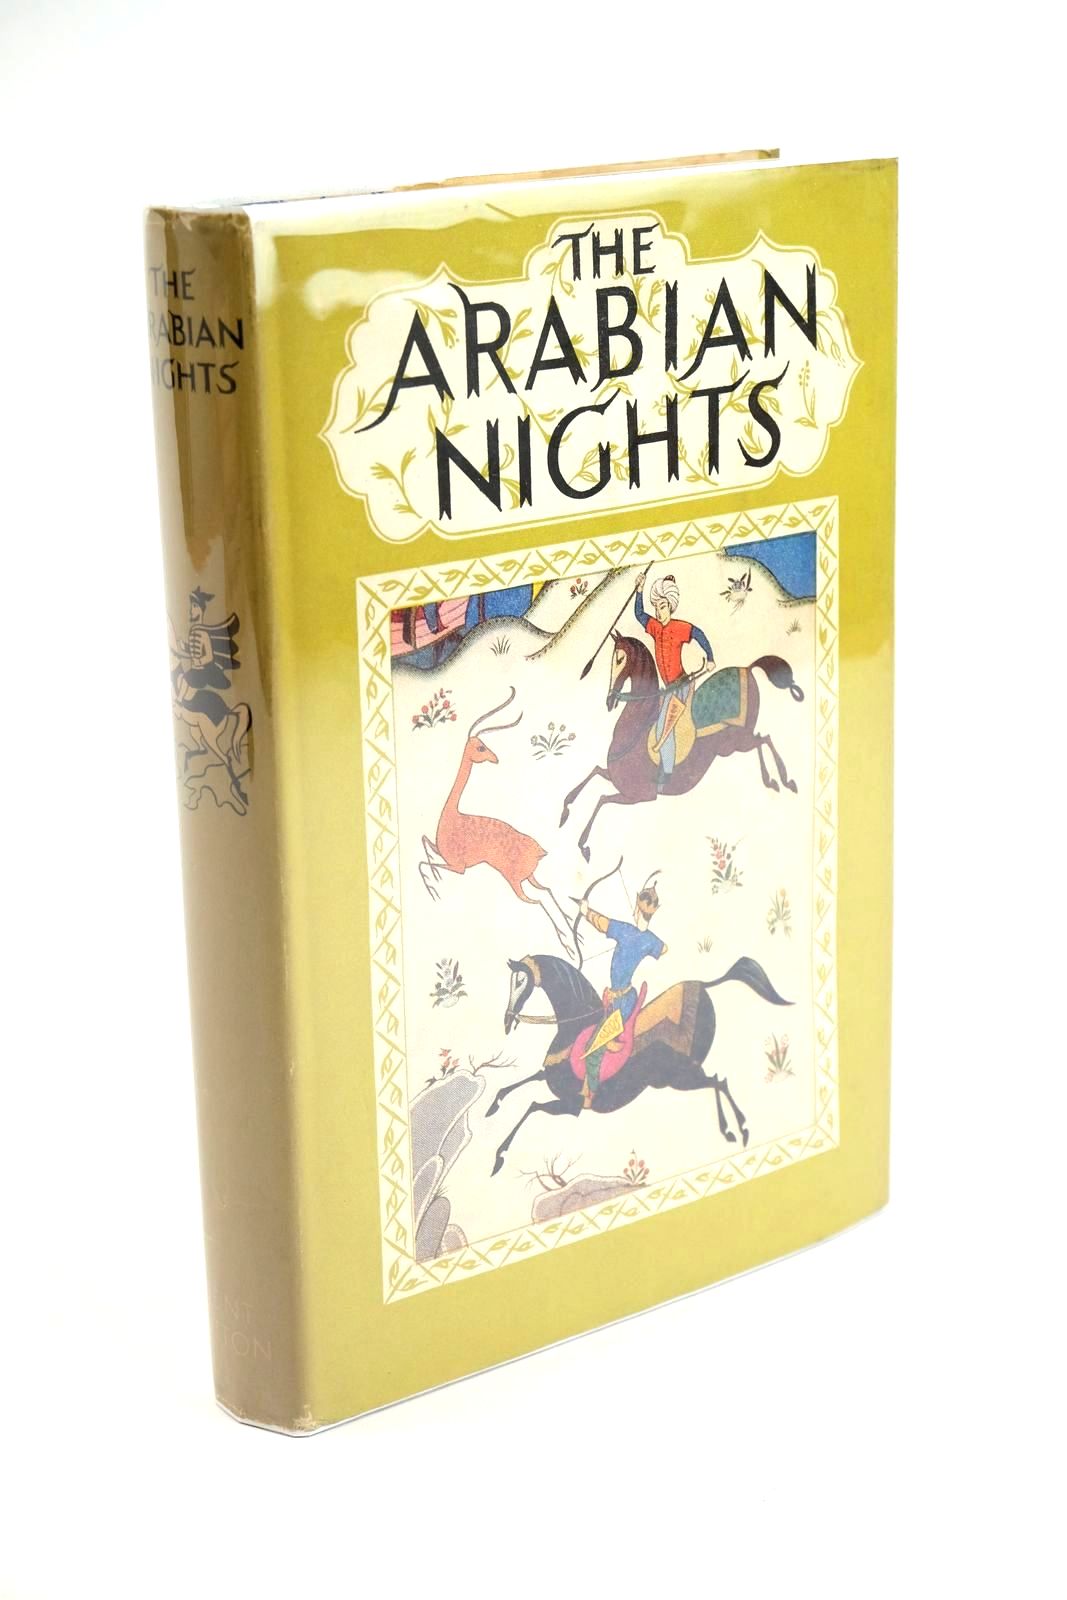 Photo of FAIRY TALES FROM THE ARABIAN NIGHTS written by Dixon, E. illustrated by Kiddell-Monroe, Joan published by J.M. Dent &amp; Sons Ltd. (STOCK CODE: 1323545)  for sale by Stella & Rose's Books